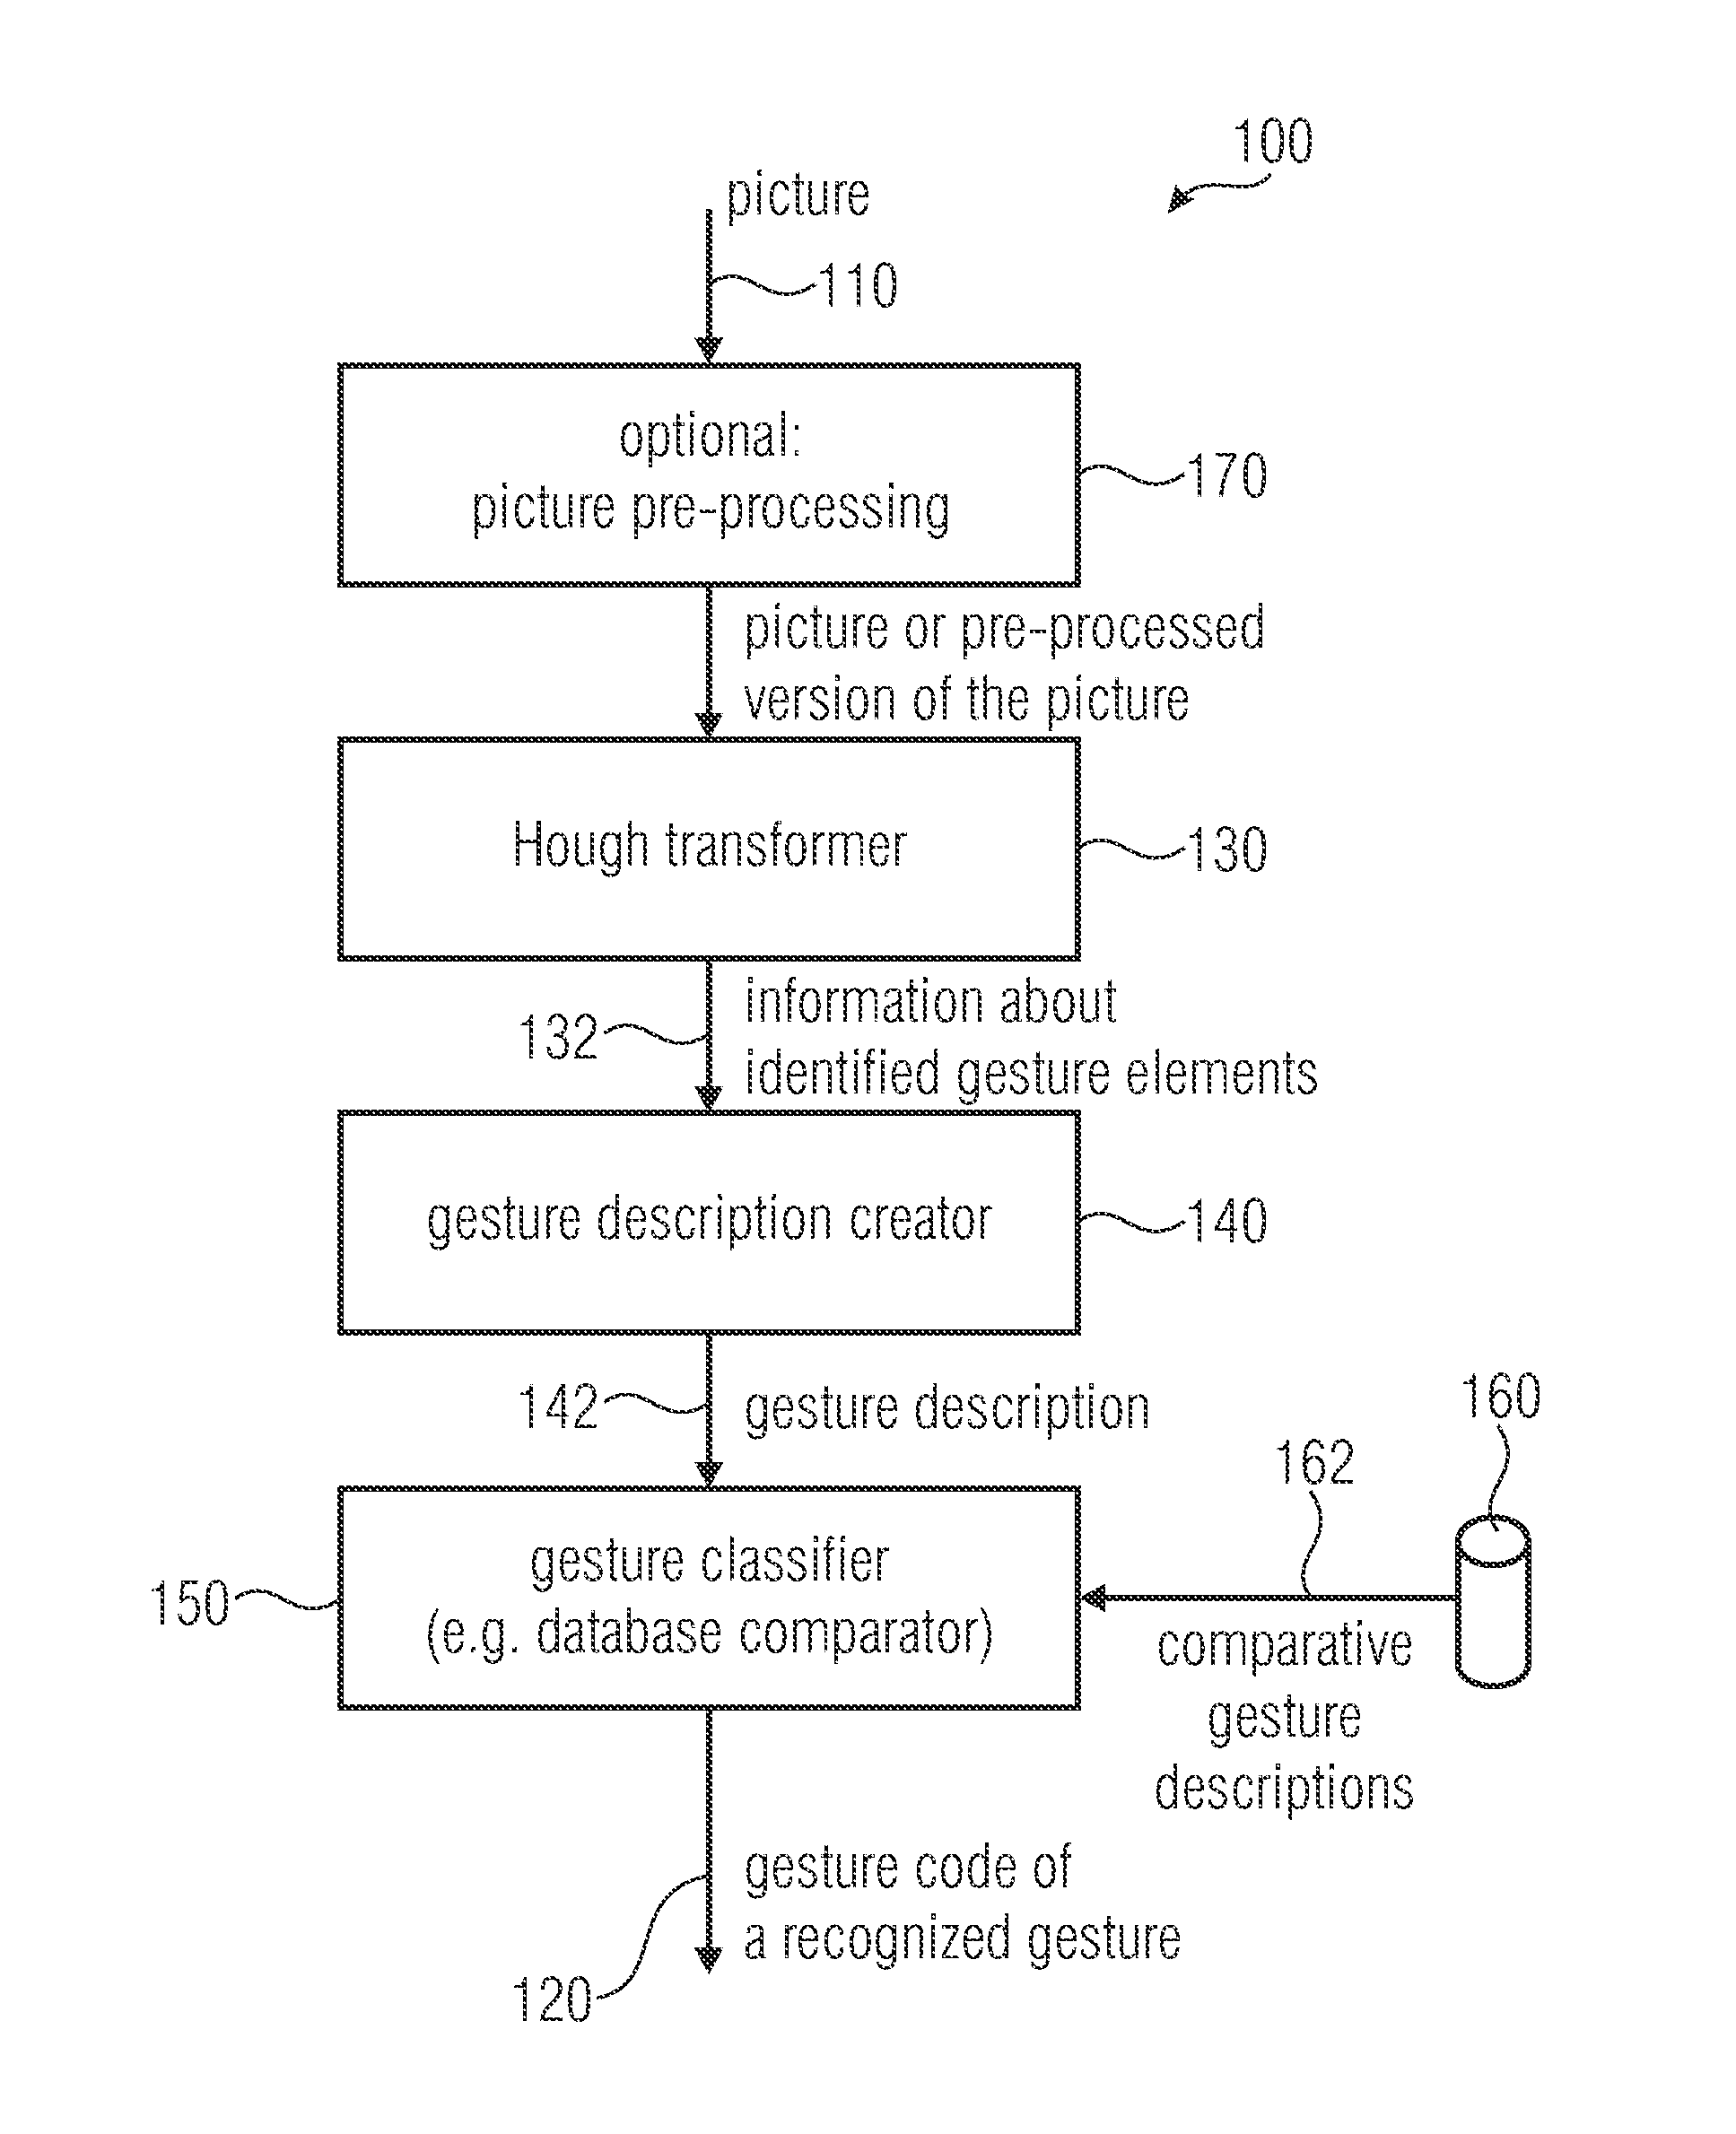 Apparatus, method and computer program for recognizing a gesture in a picture, and apparatus, method and computer program for controlling a device